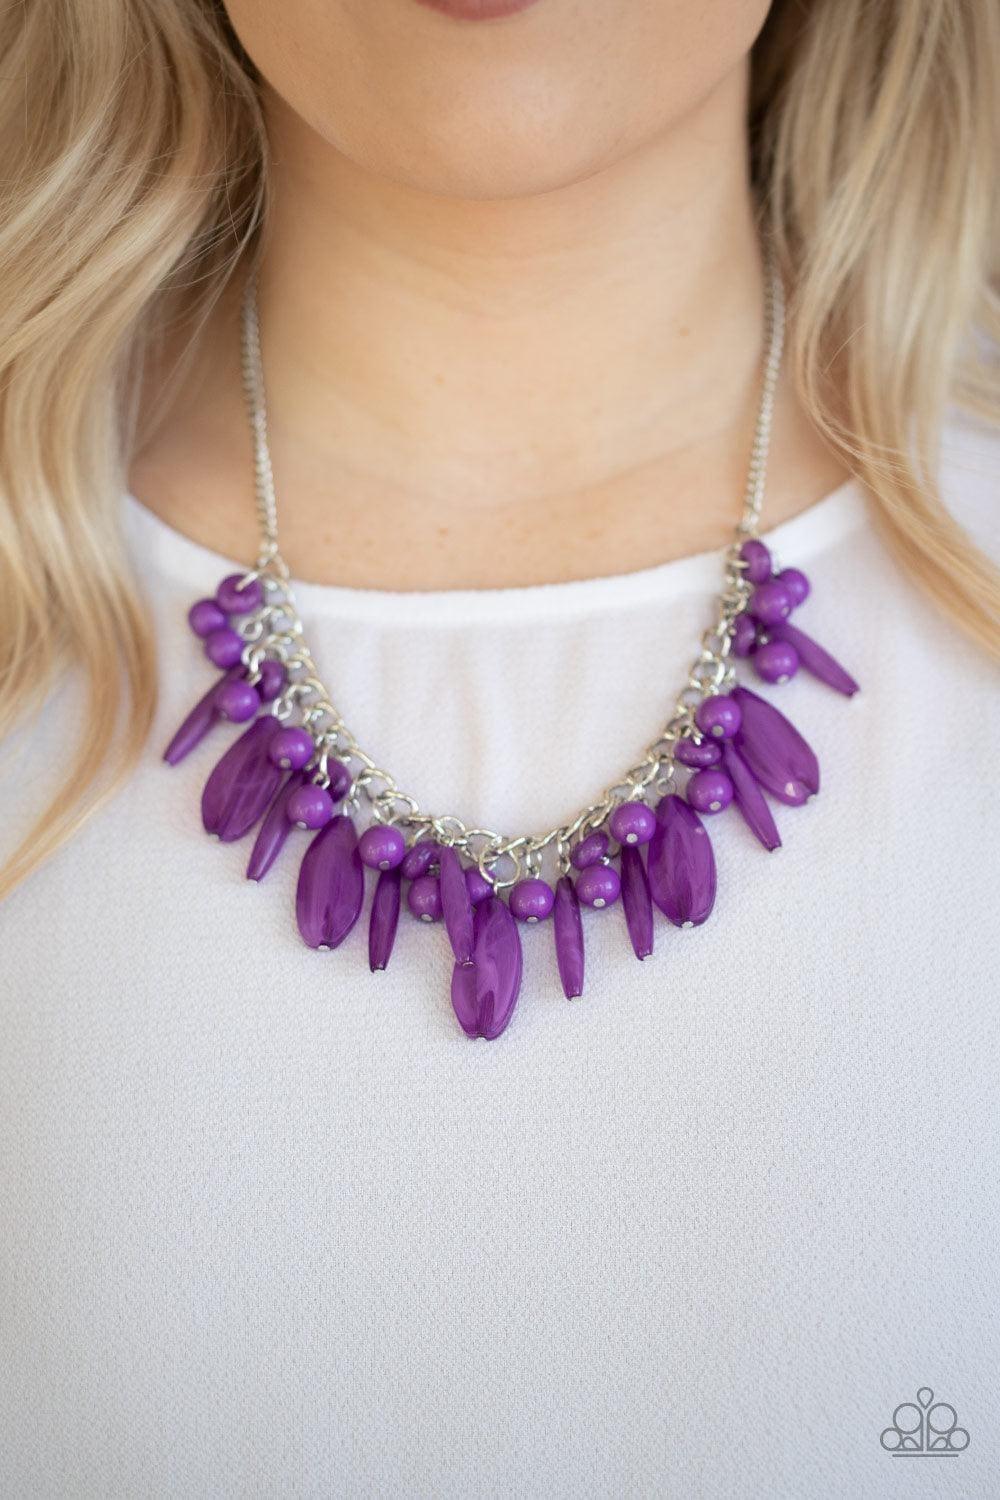 Paparazzi Accessories - Miami Martinis - Purple Necklace - Bling by JessieK